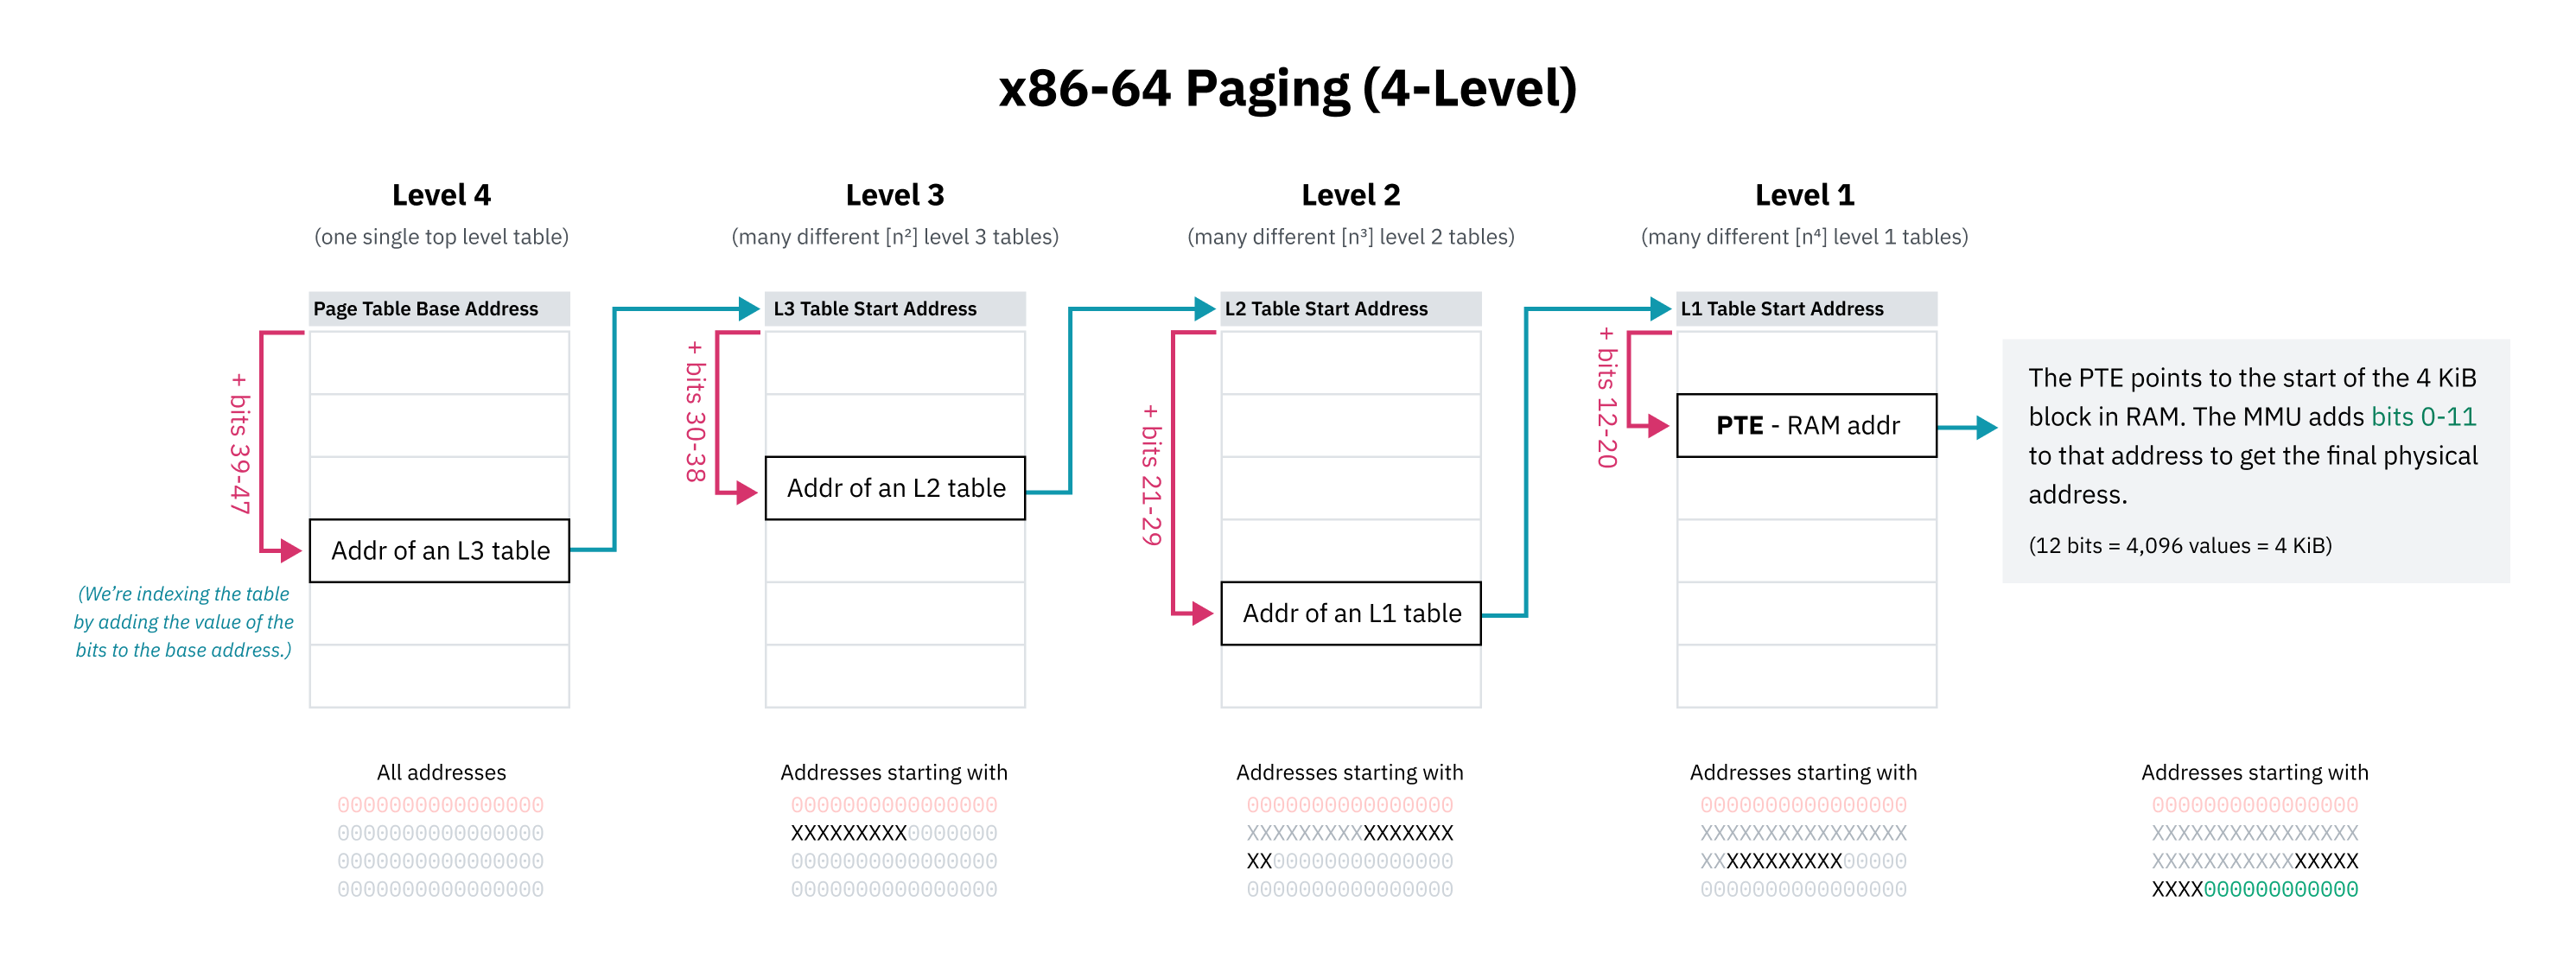 A large, detailed, and full-color diagram of 4-level paging on x86-64. It depicts the four levels of page tables, highlighting the bits that serve as a "prefix" at each level. It also shows the tables being indexed by those prefix bits by adding the value of the bits to the table's base address. The entries in each table point to the start of the next table, except for the final level 1 which points to the start of a 4 KiB block in RAM. The MMU adds the lowest 12 bits to that address to get the final physical address. There is one level 4 table, n-squared level 3 tables, and so on.